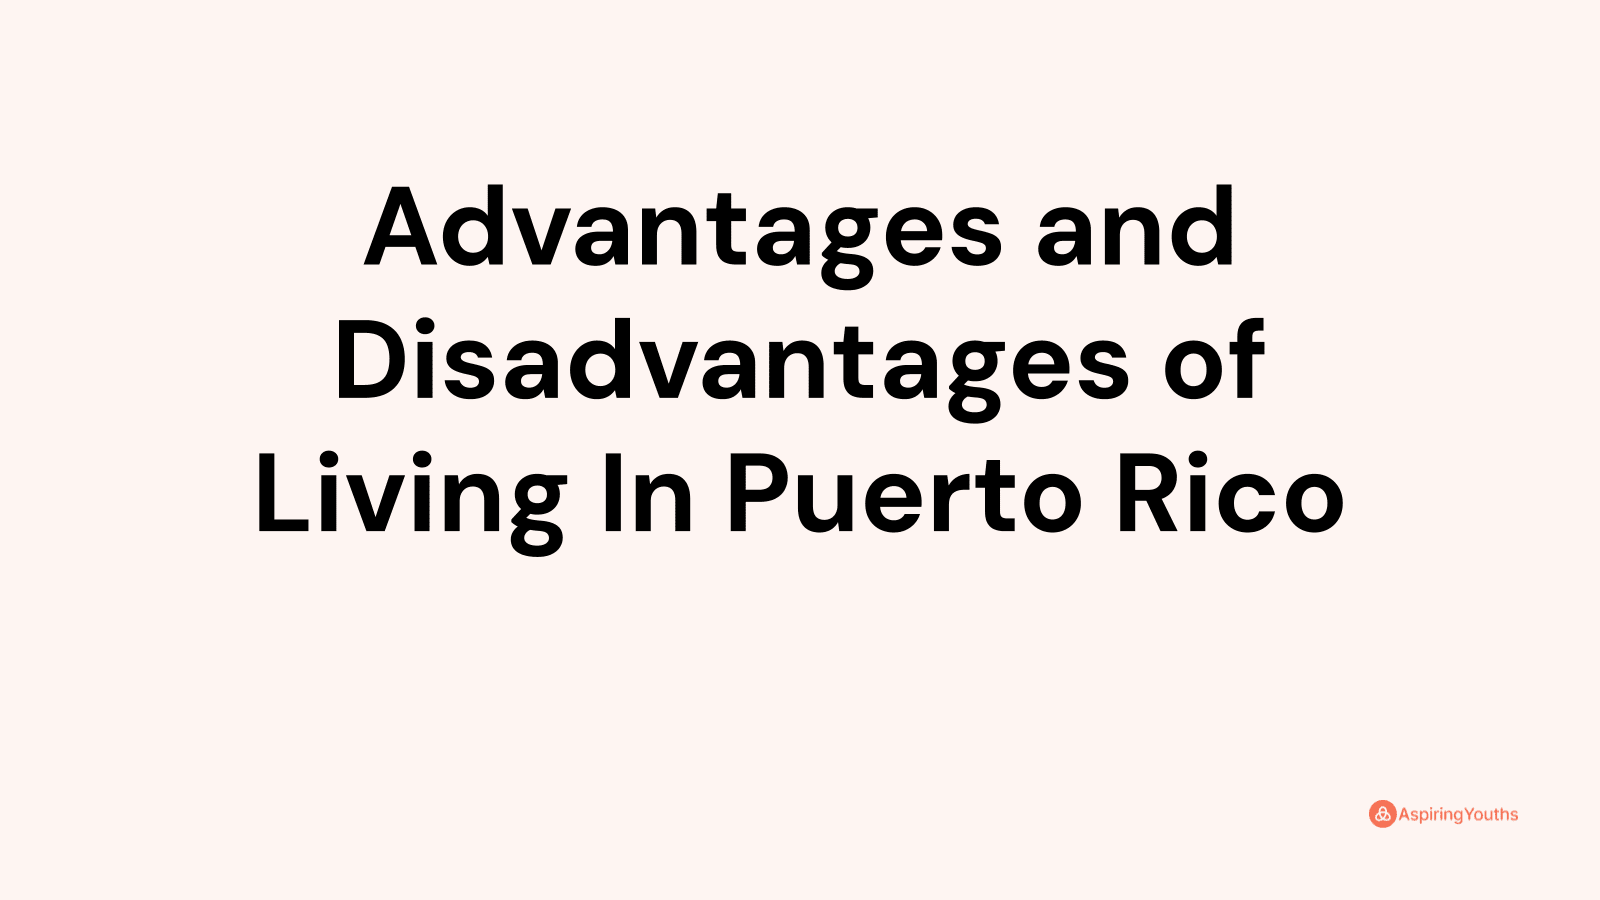 Advantages and disadvantages of Living In Puerto Rico